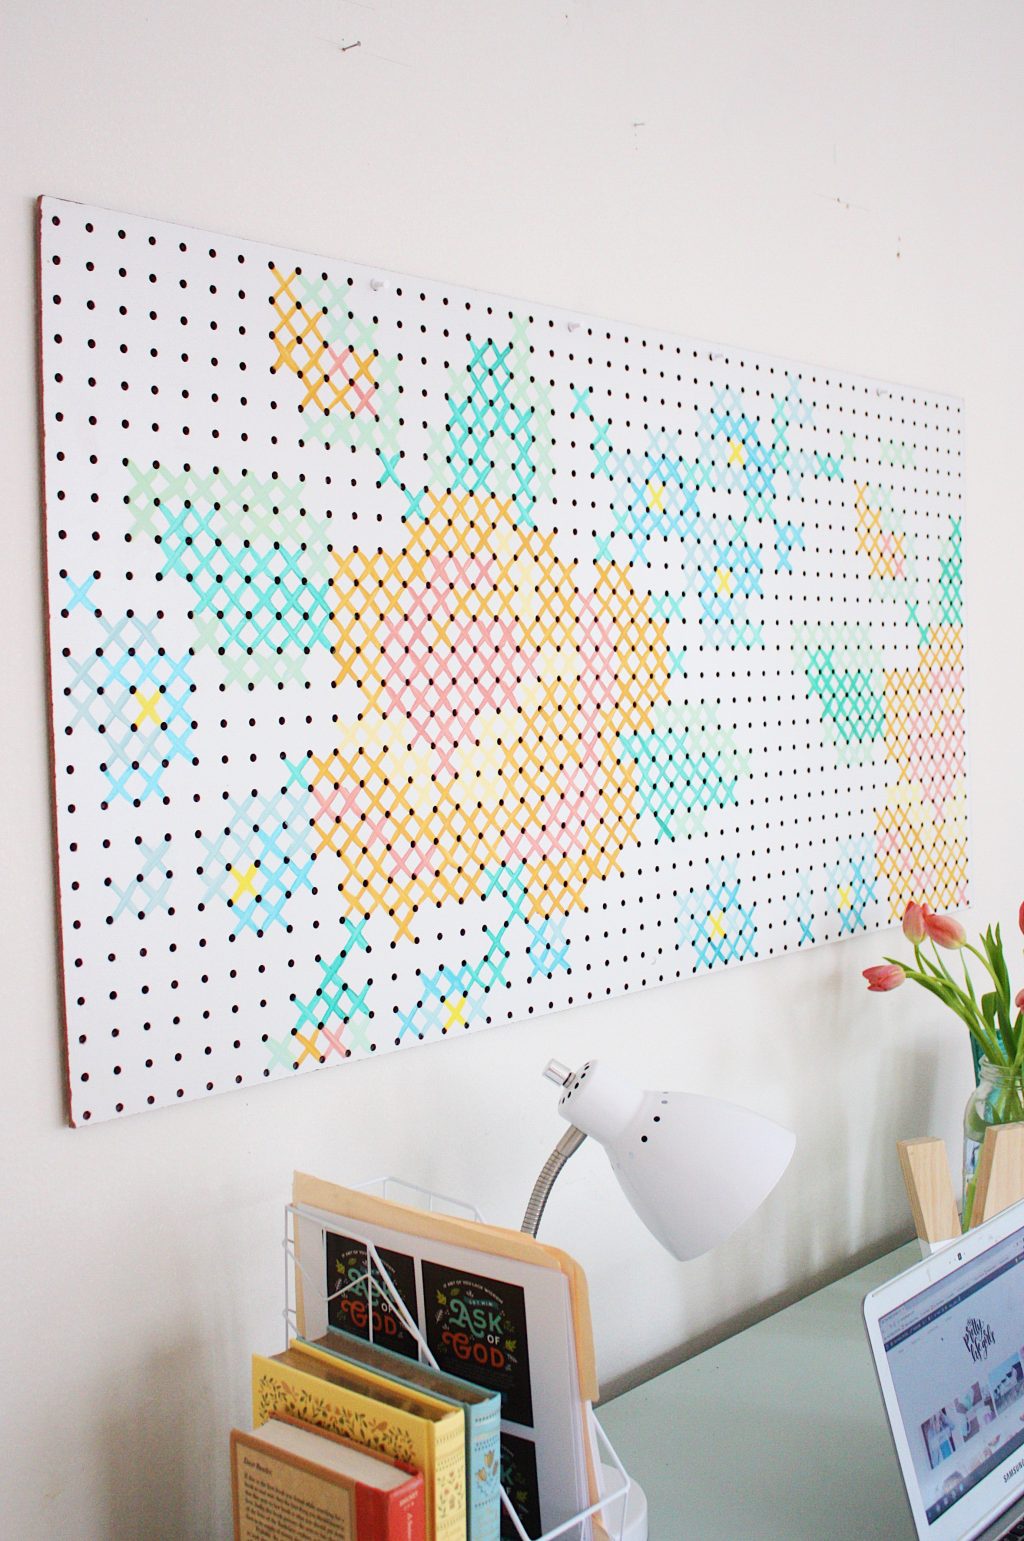 Cross stitch art tutorial featured by top US craft blog, The Pretty Life Girls.